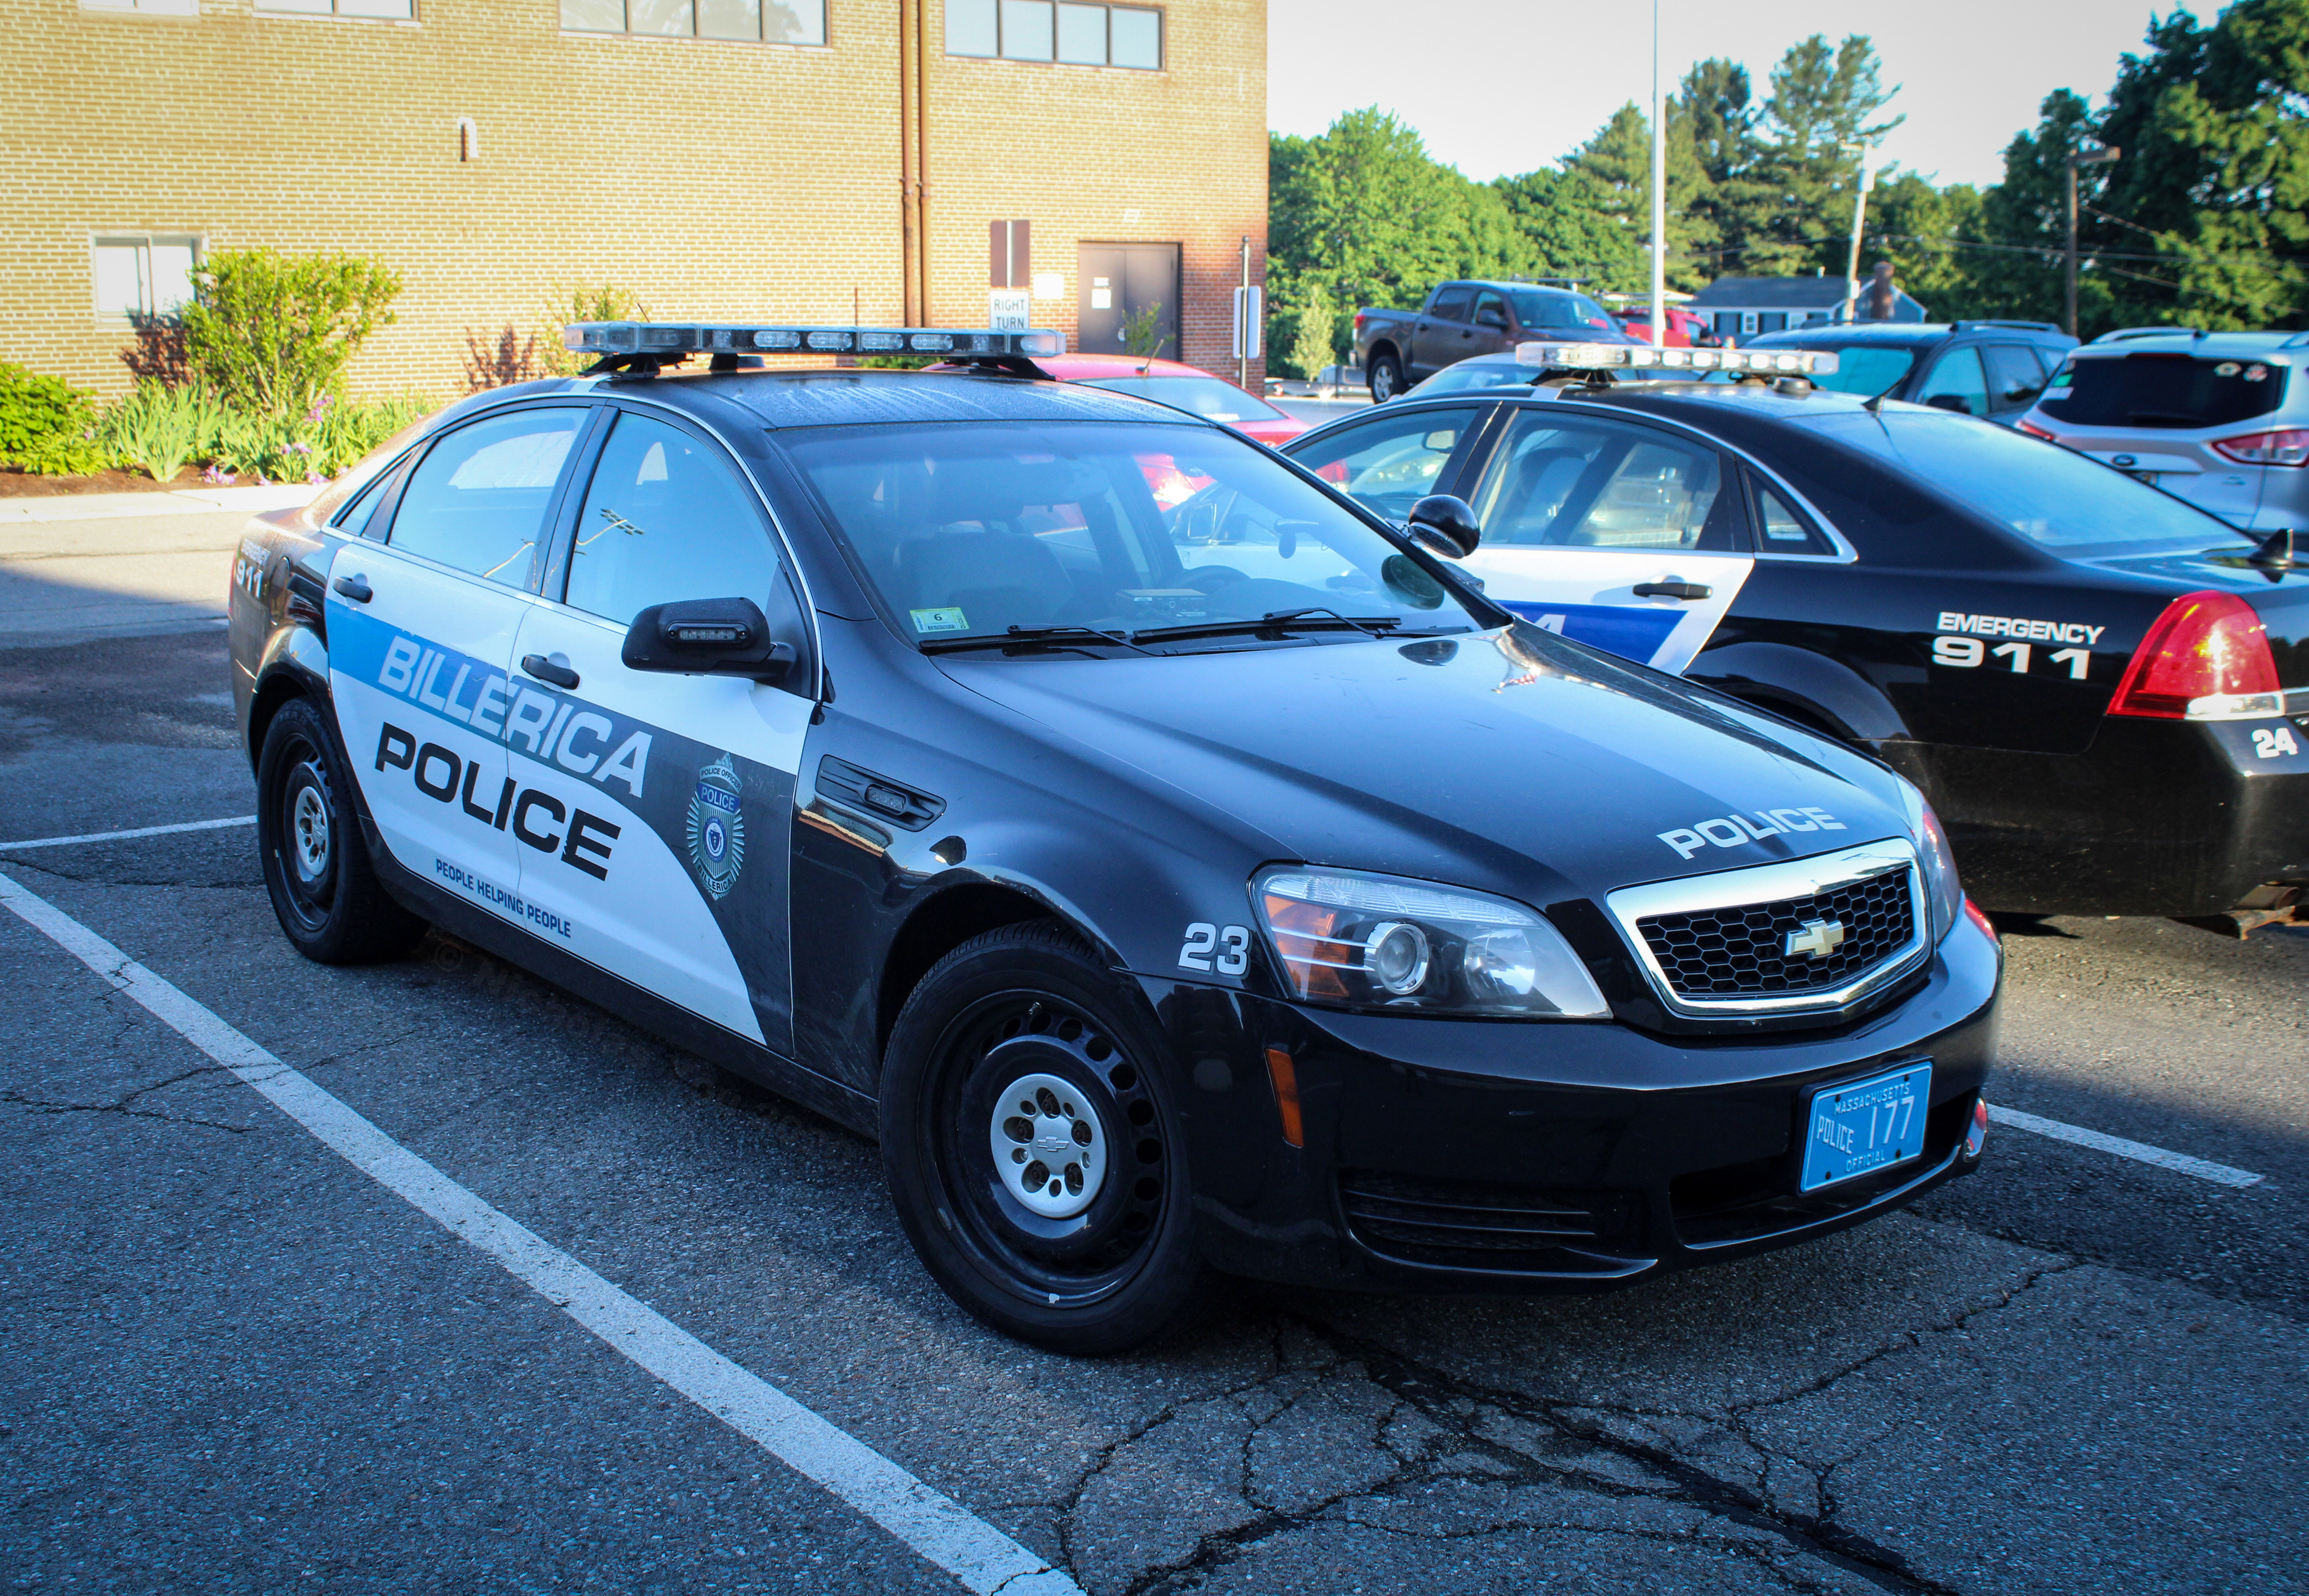 A photo  of Billerica Police
            Car 23, a 2013 Chevrolet Caprice             taken by Nicholas You